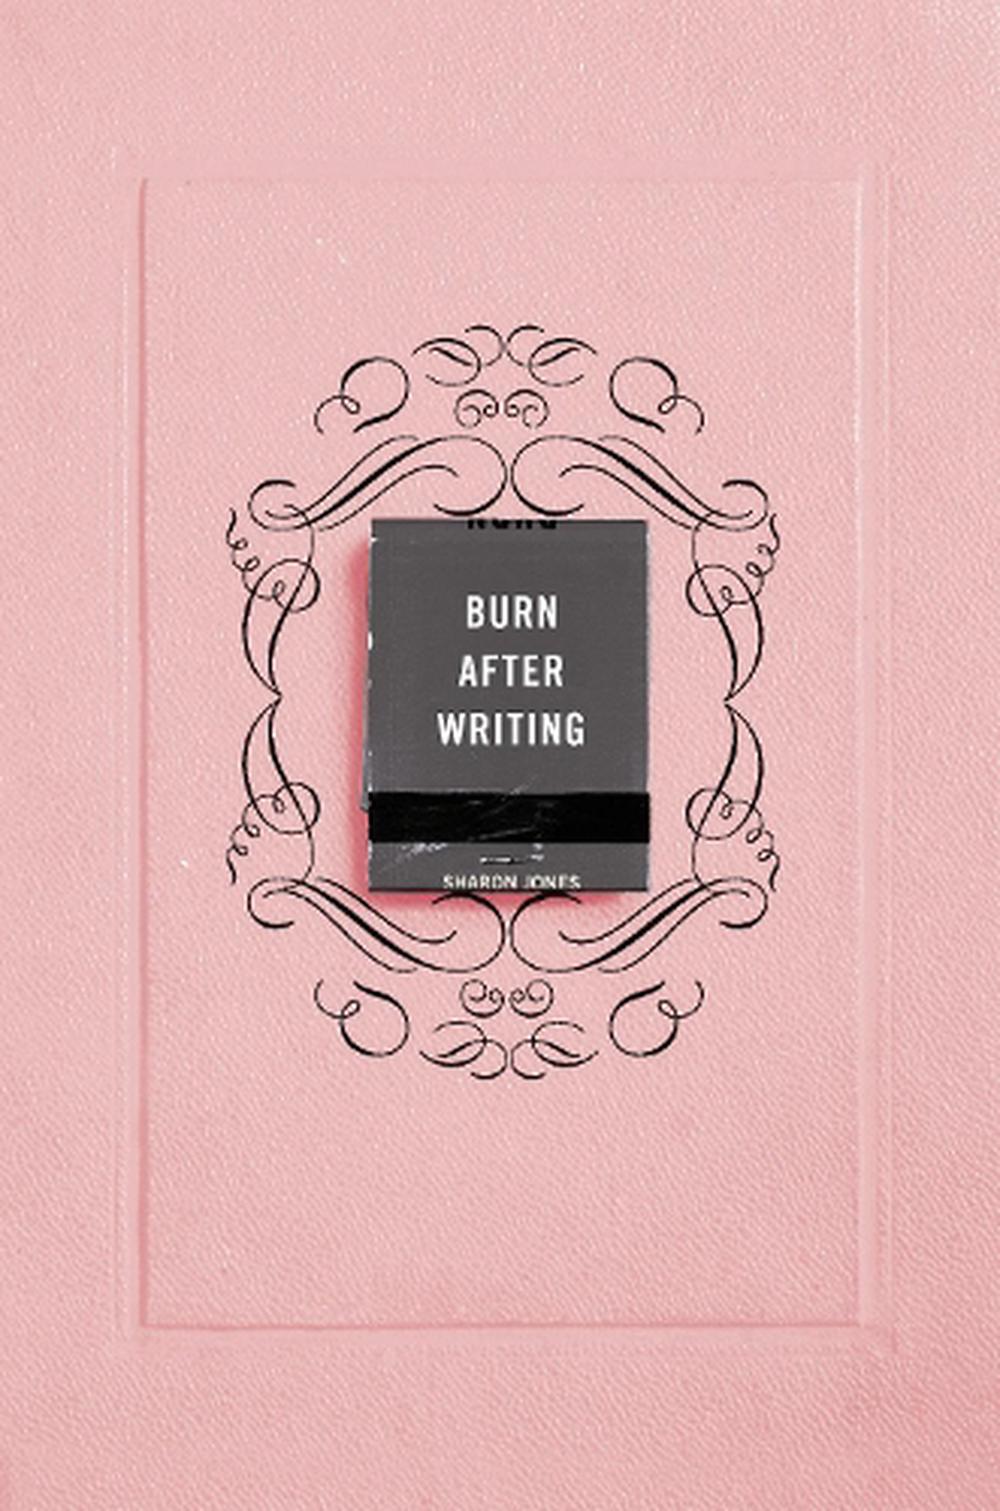 burn after writing book summary